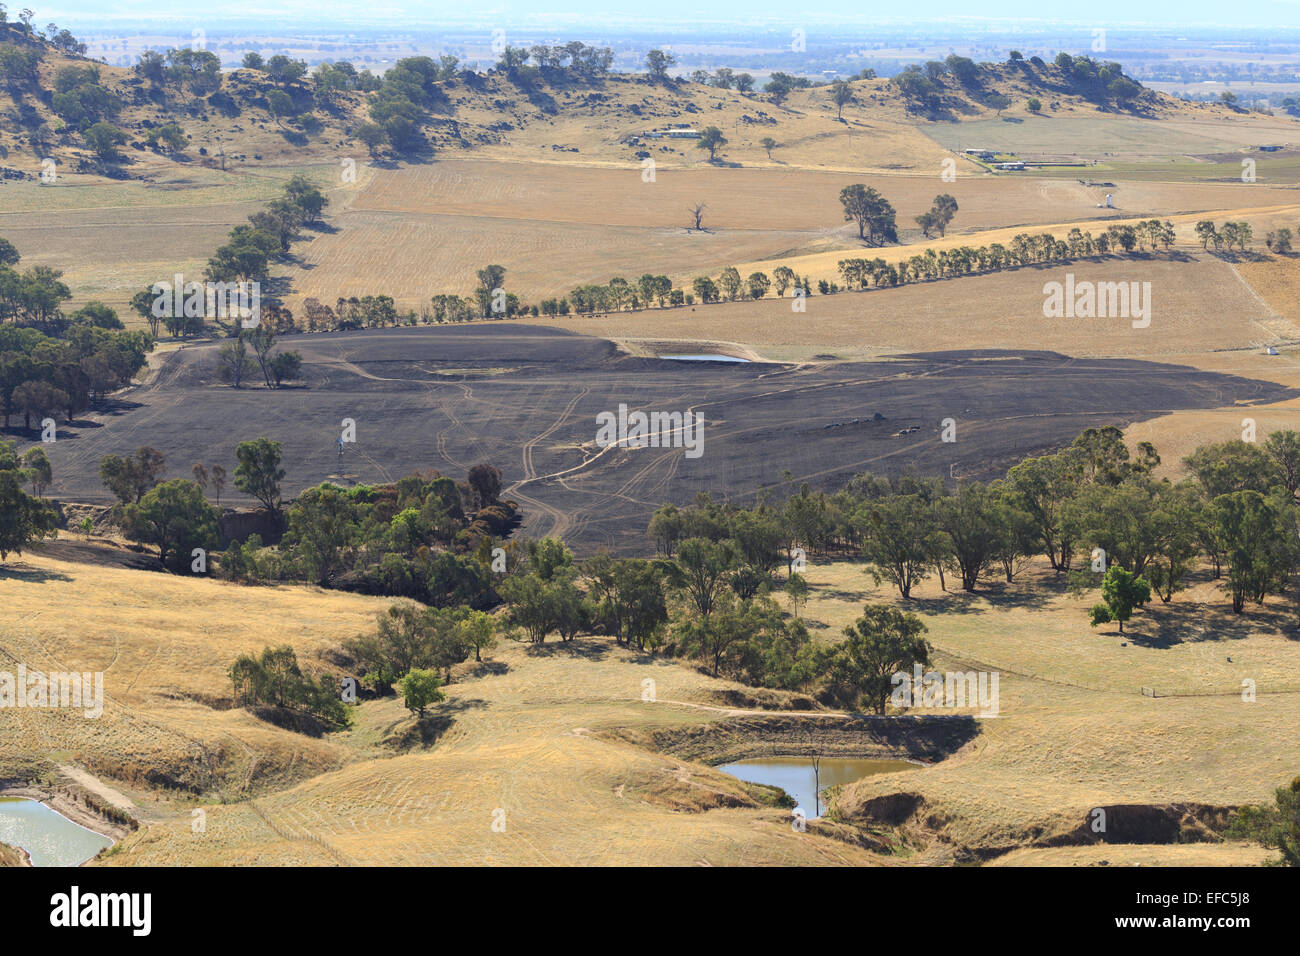 A photograph of the aftermath of a bush fire on a dry Australian farm in central western NSW. Stock Photo